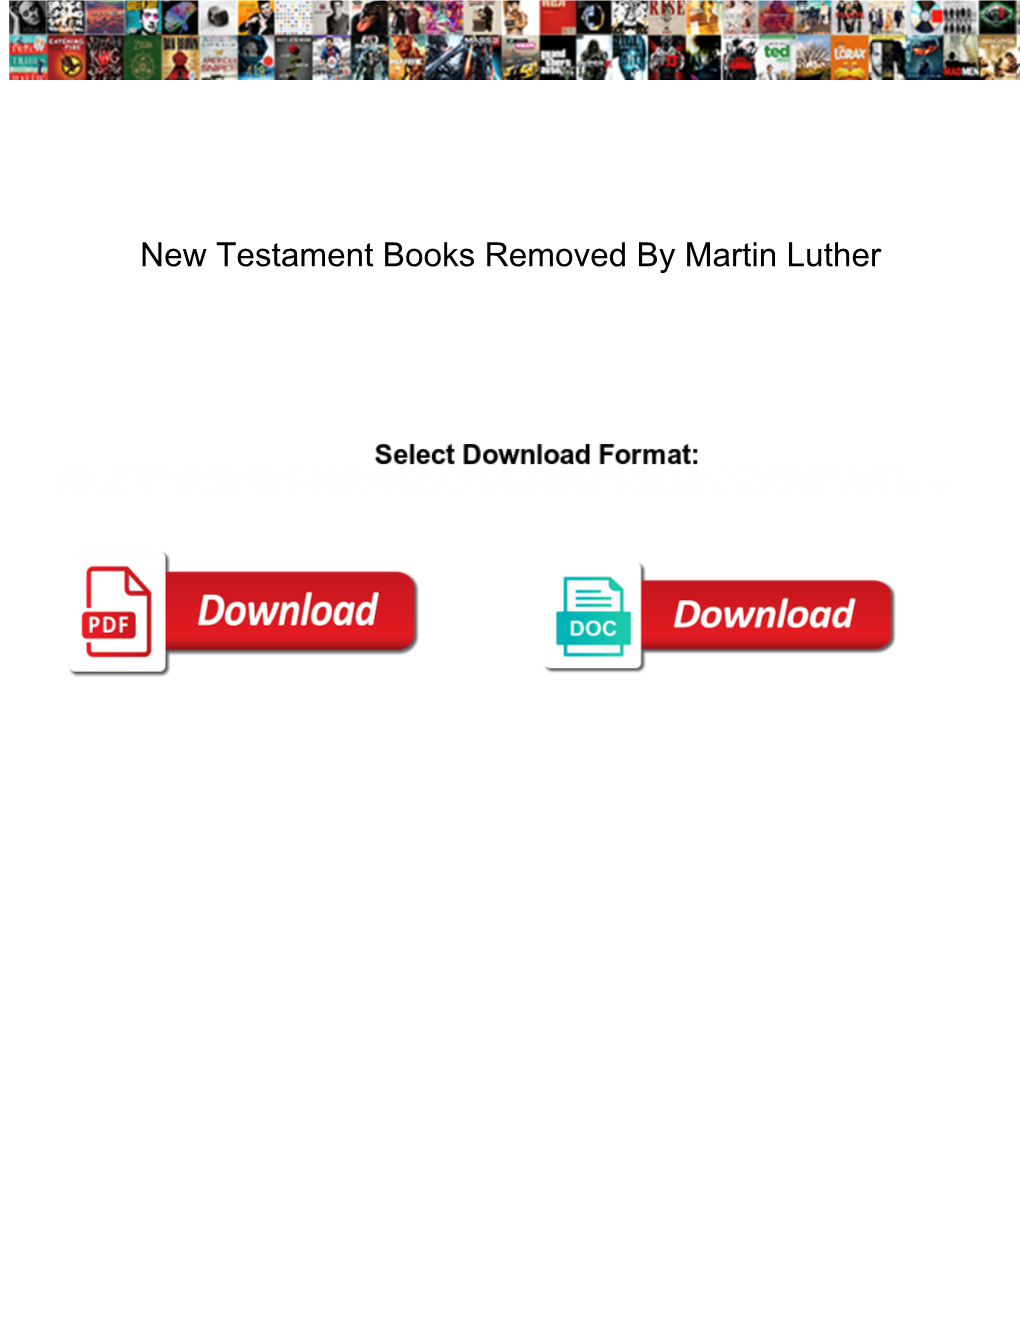 New Testament Books Removed by Martin Luther